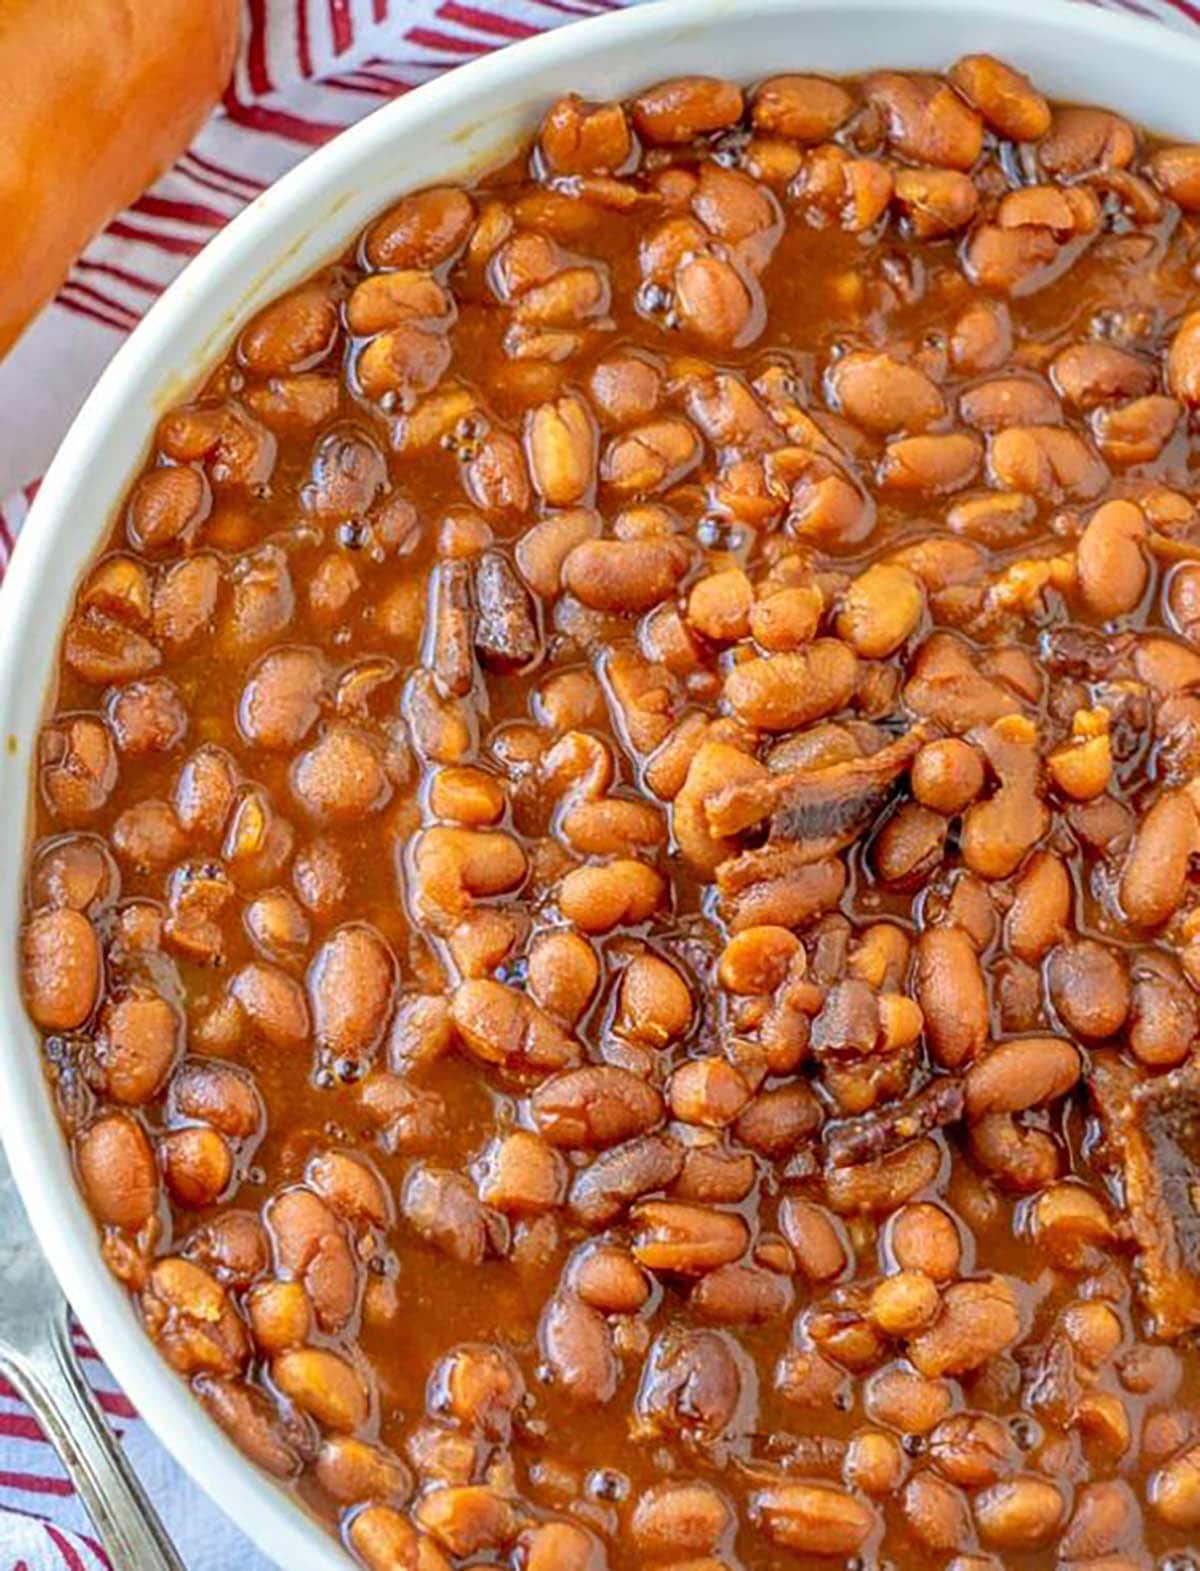 Boston Baked Beans in a bowl